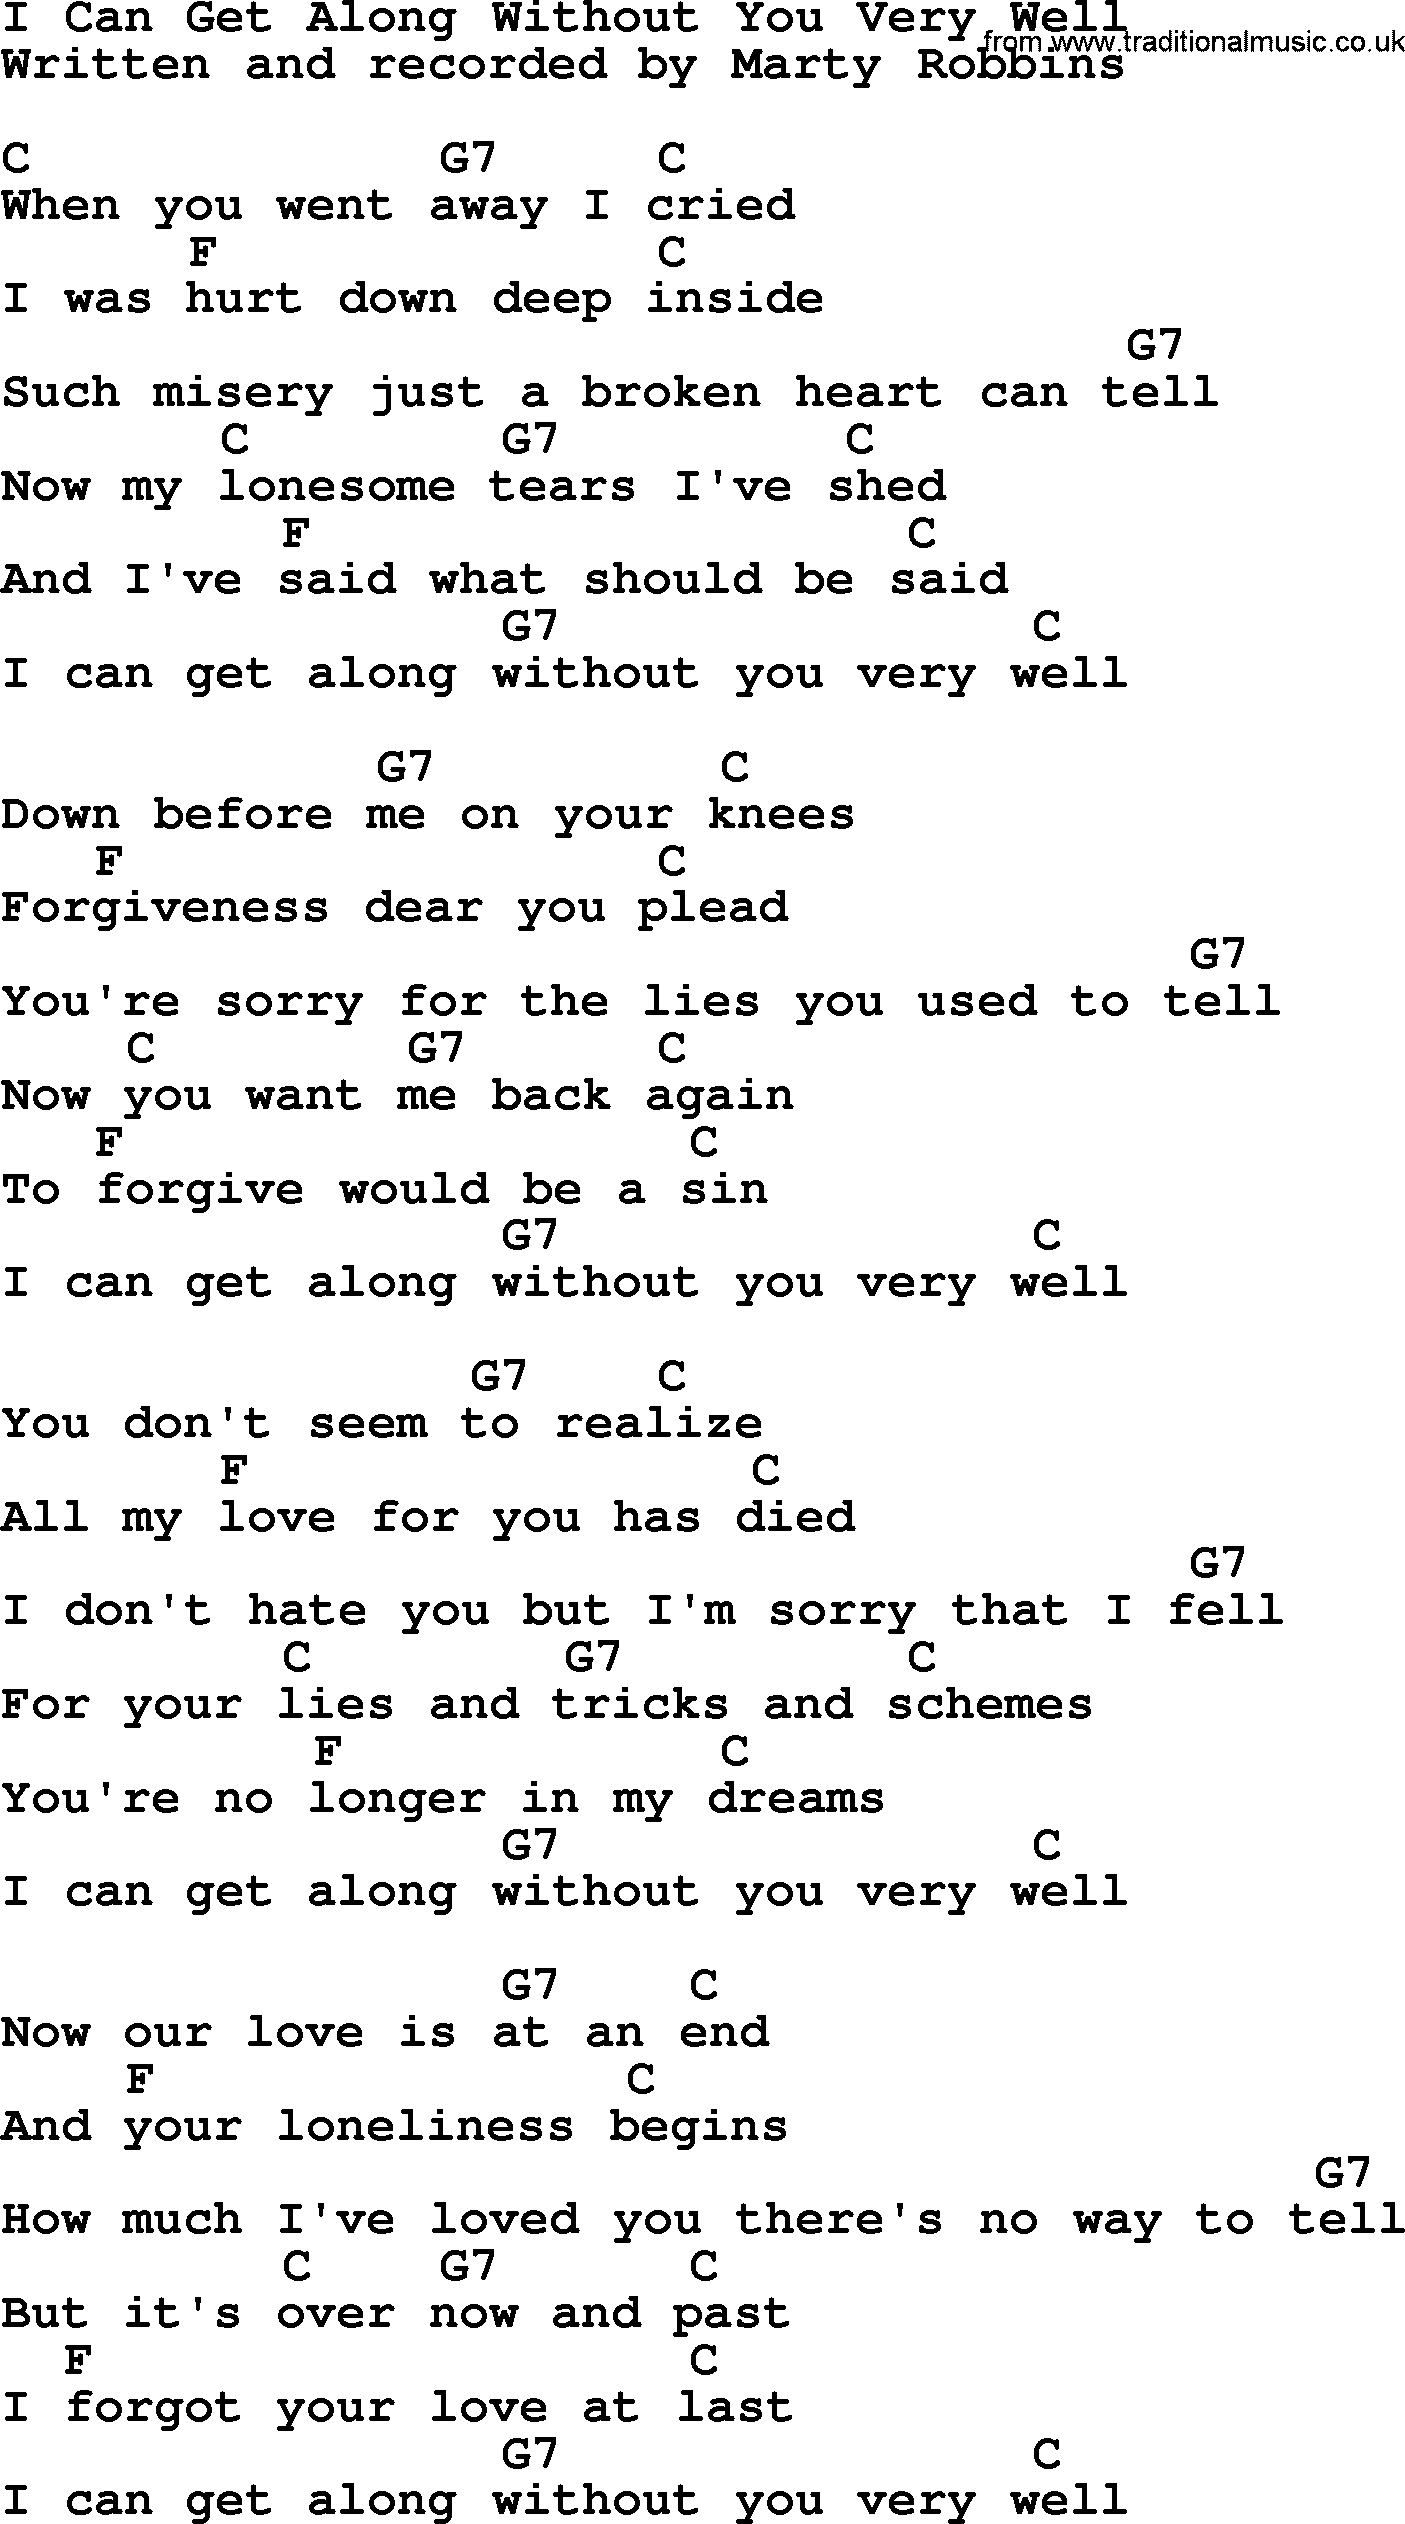 Marty Robbins song: I Can Get Along Without You Very Well, lyrics and chords